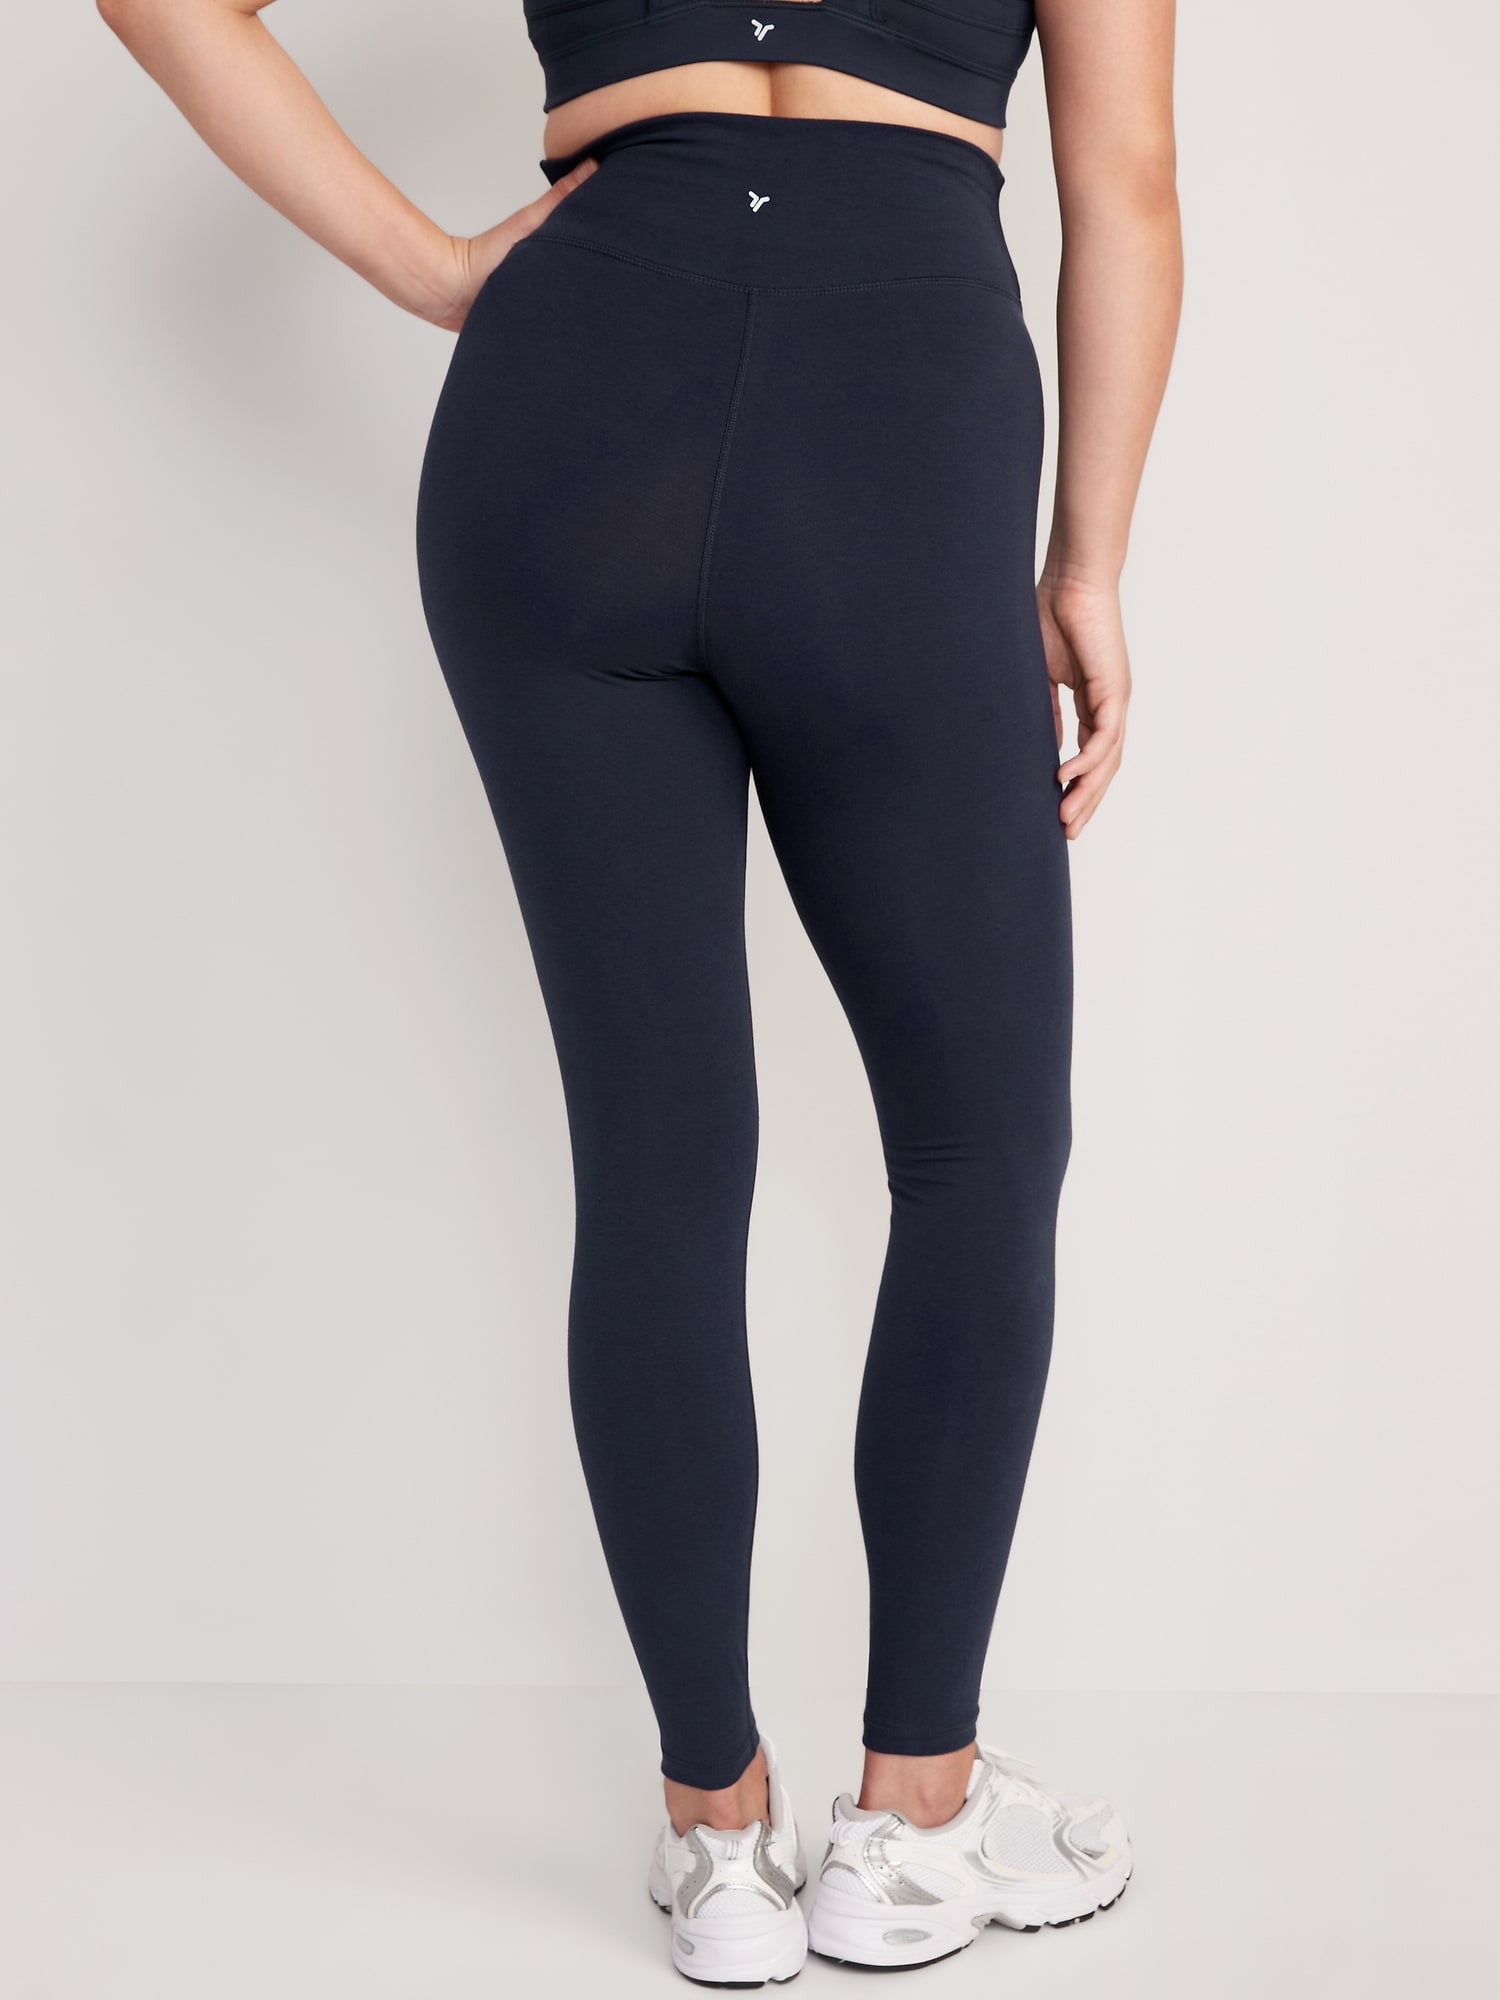 Charcoal Full Length Leggings, High Waisted and 5 Star Rated